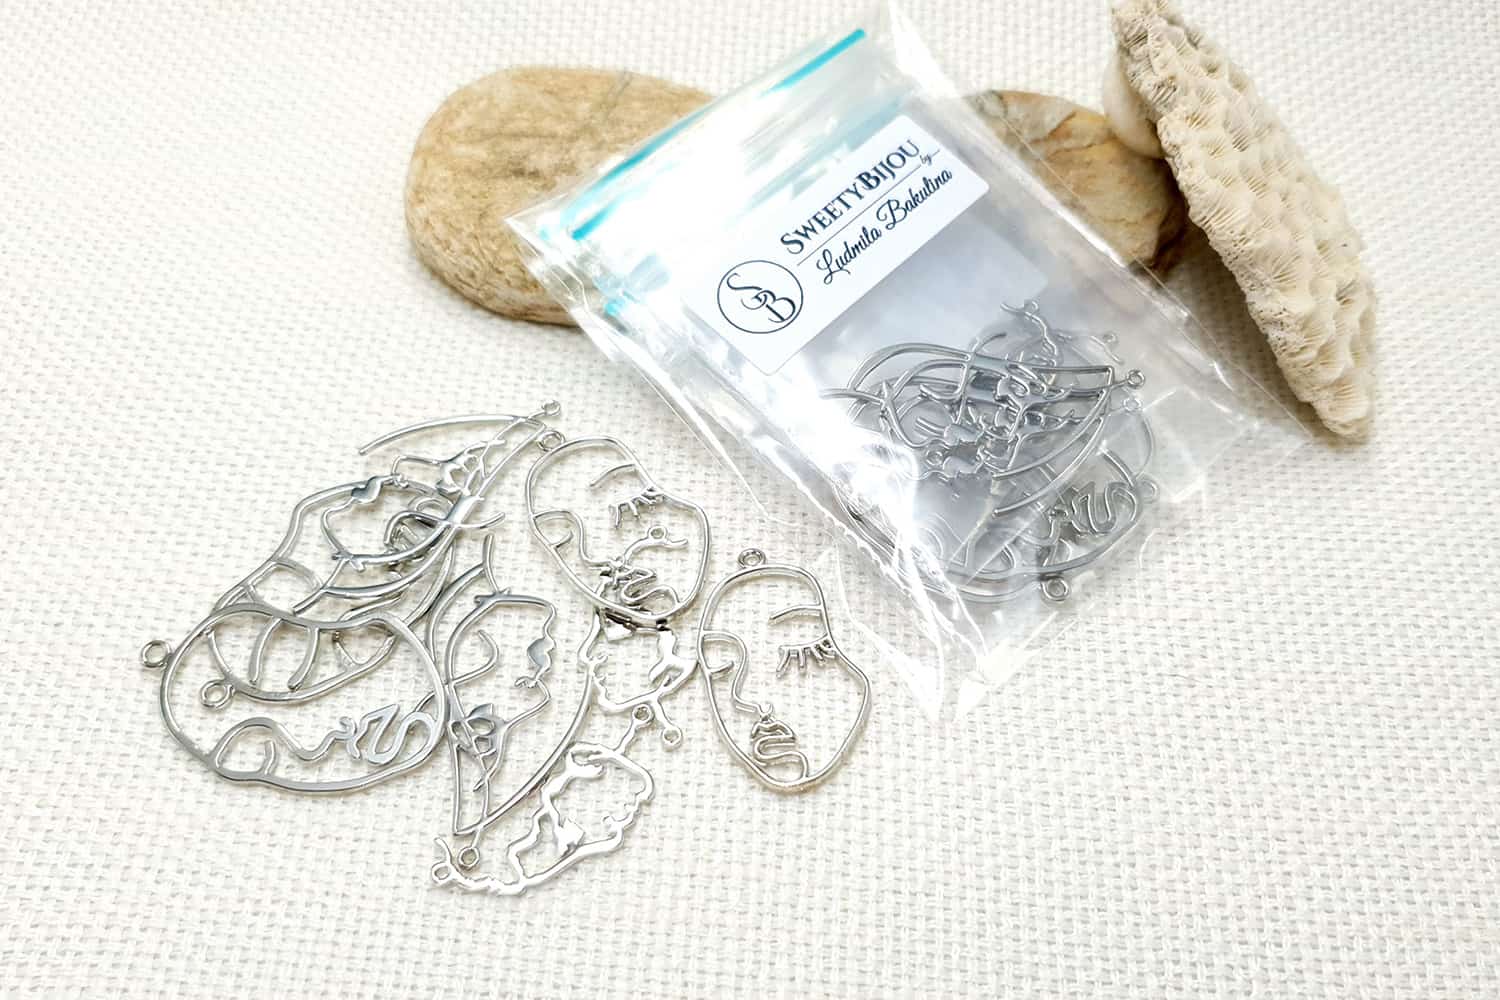 Faces - Set of 8pcs Silver Color Metal Jewelry Findings (22384)